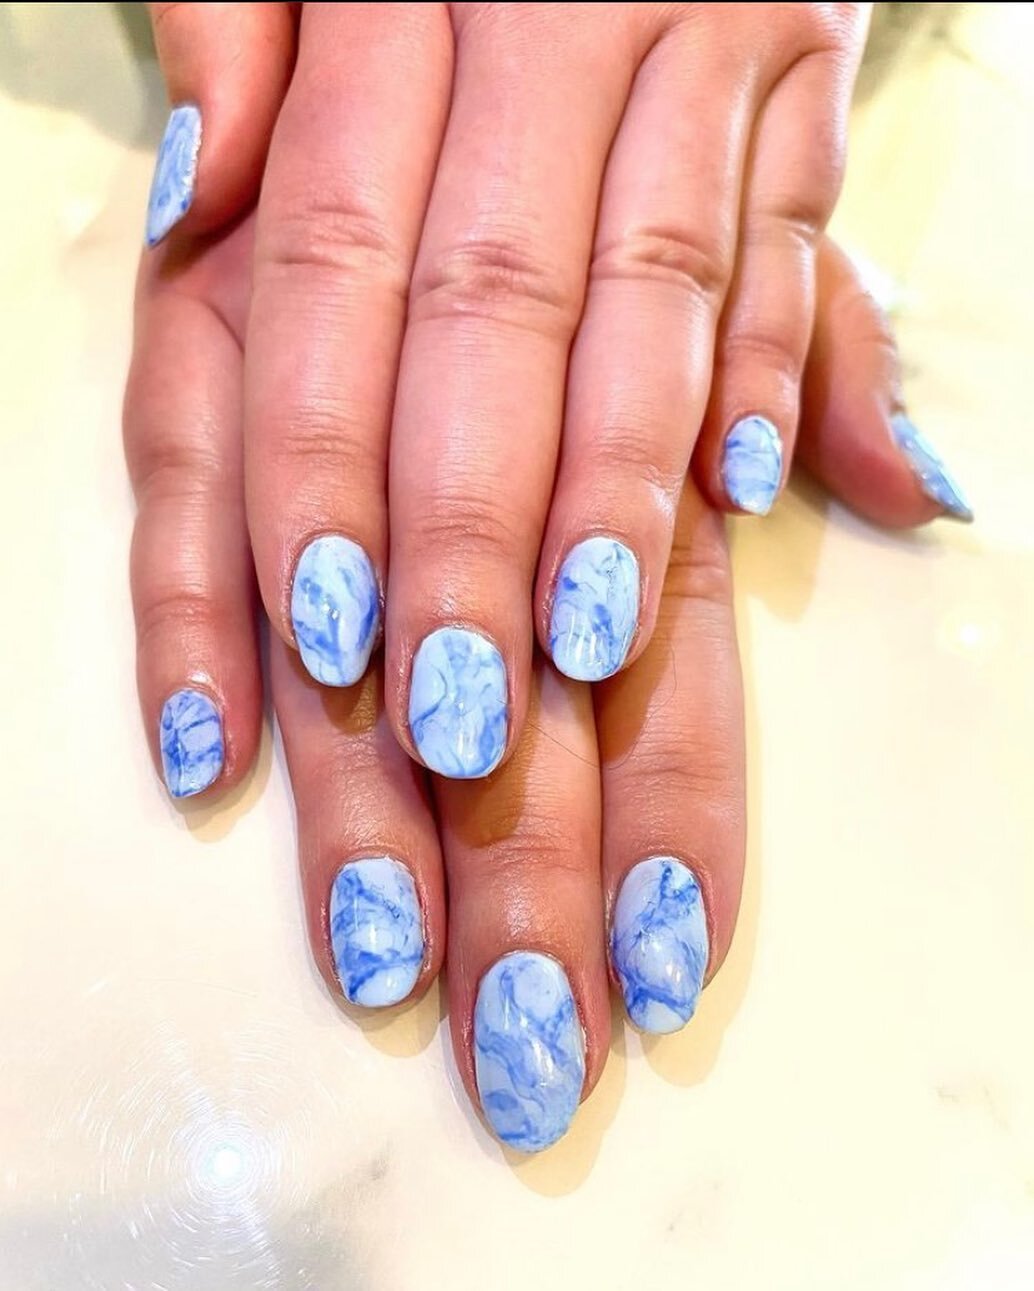 Chase away your winter blues with us! View our nail and spa service menu on our website. Link in bio!
Nails by Mattie ( @mattie_finish )
#madisonwisconsin #nails #manicure #shellac #cnd #nailworld #nailart #spa #madisonwisconsin #madisonspa #madisonw